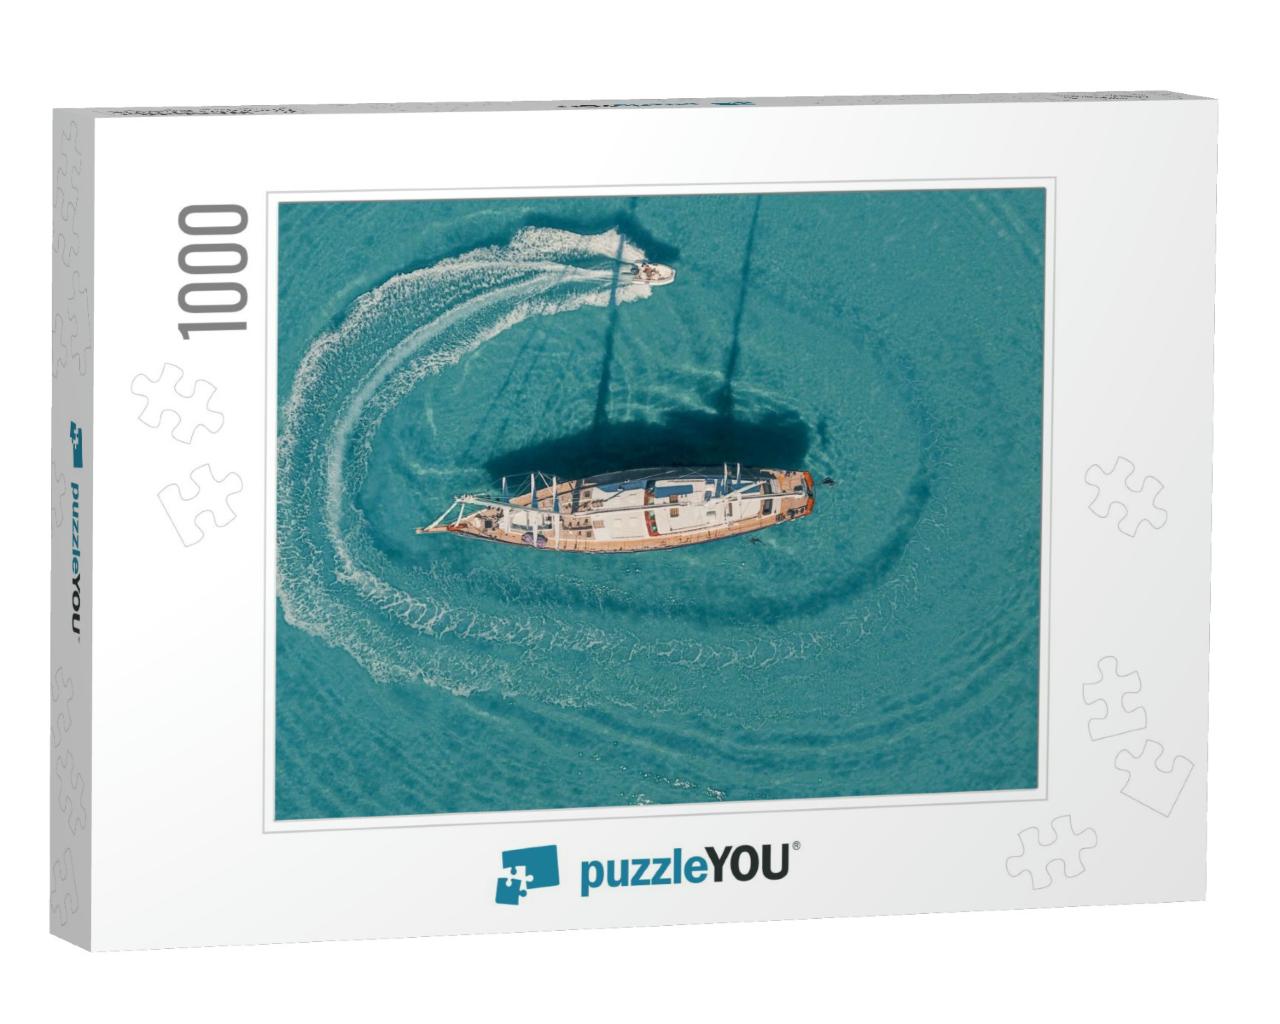 Speed Boating Around Anchored Sail Yacht... Jigsaw Puzzle with 1000 pieces